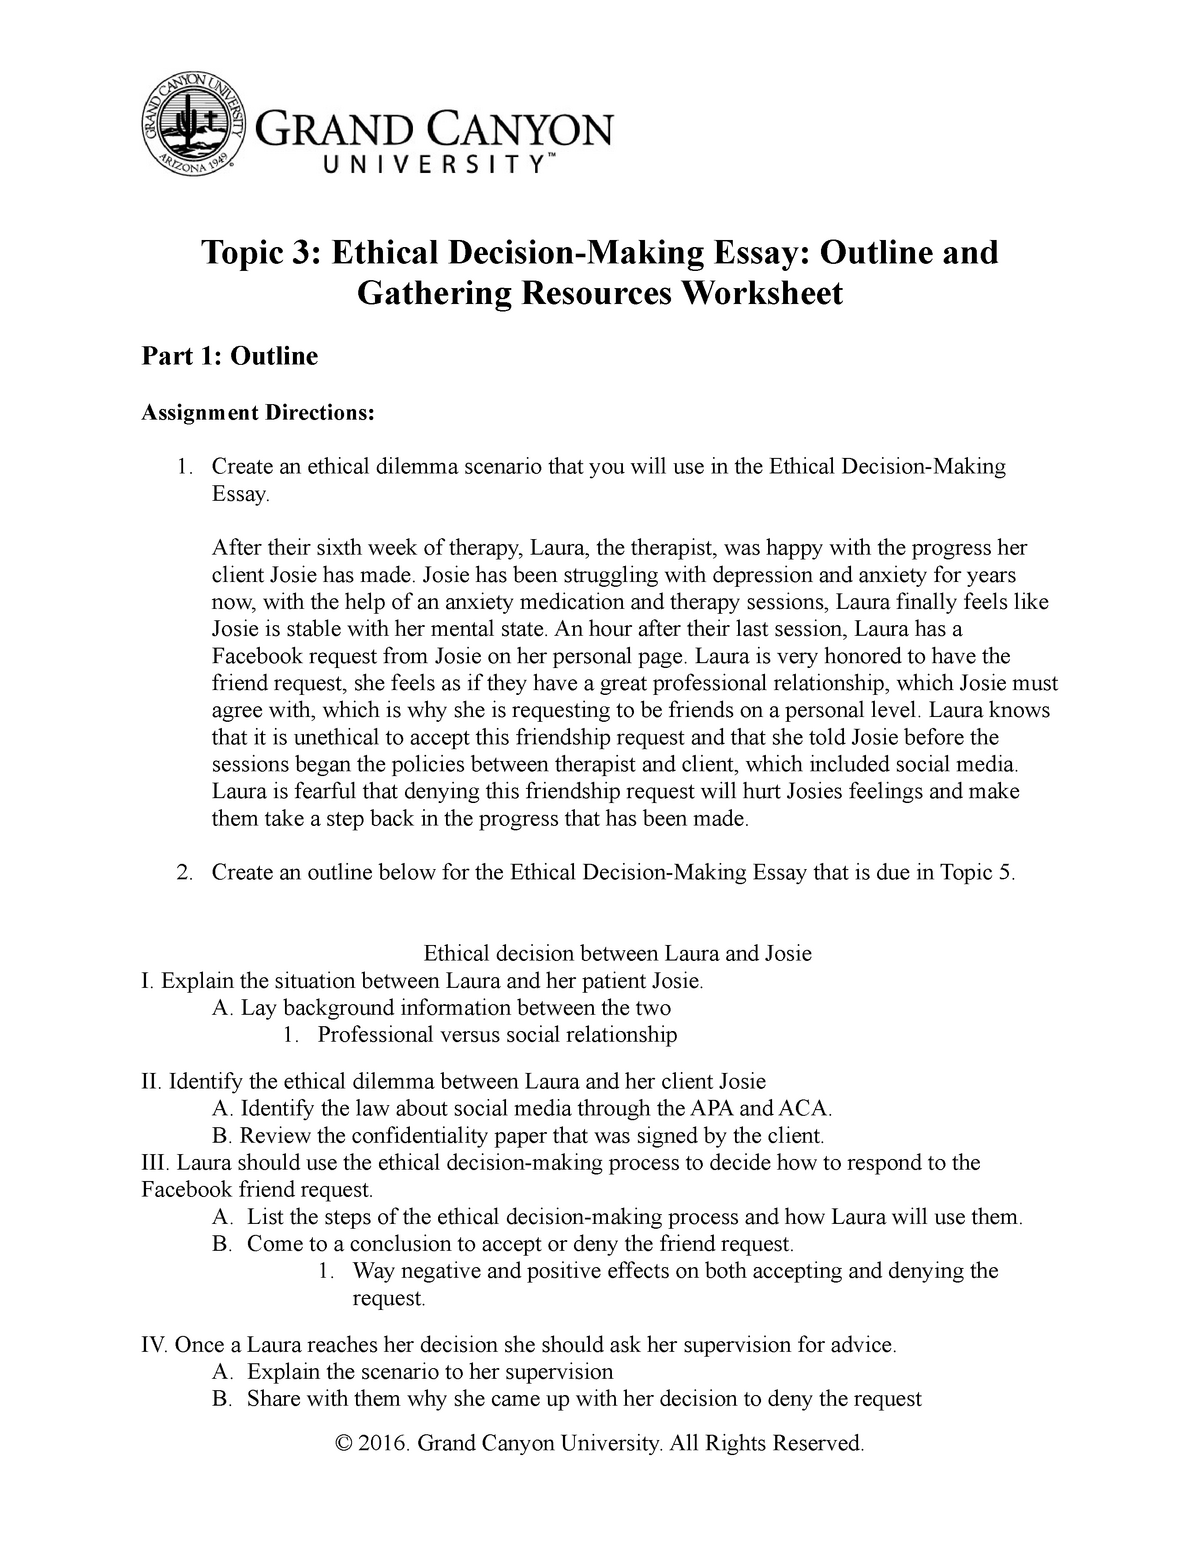 ethical decision making essay outline and gathering resources worksheet